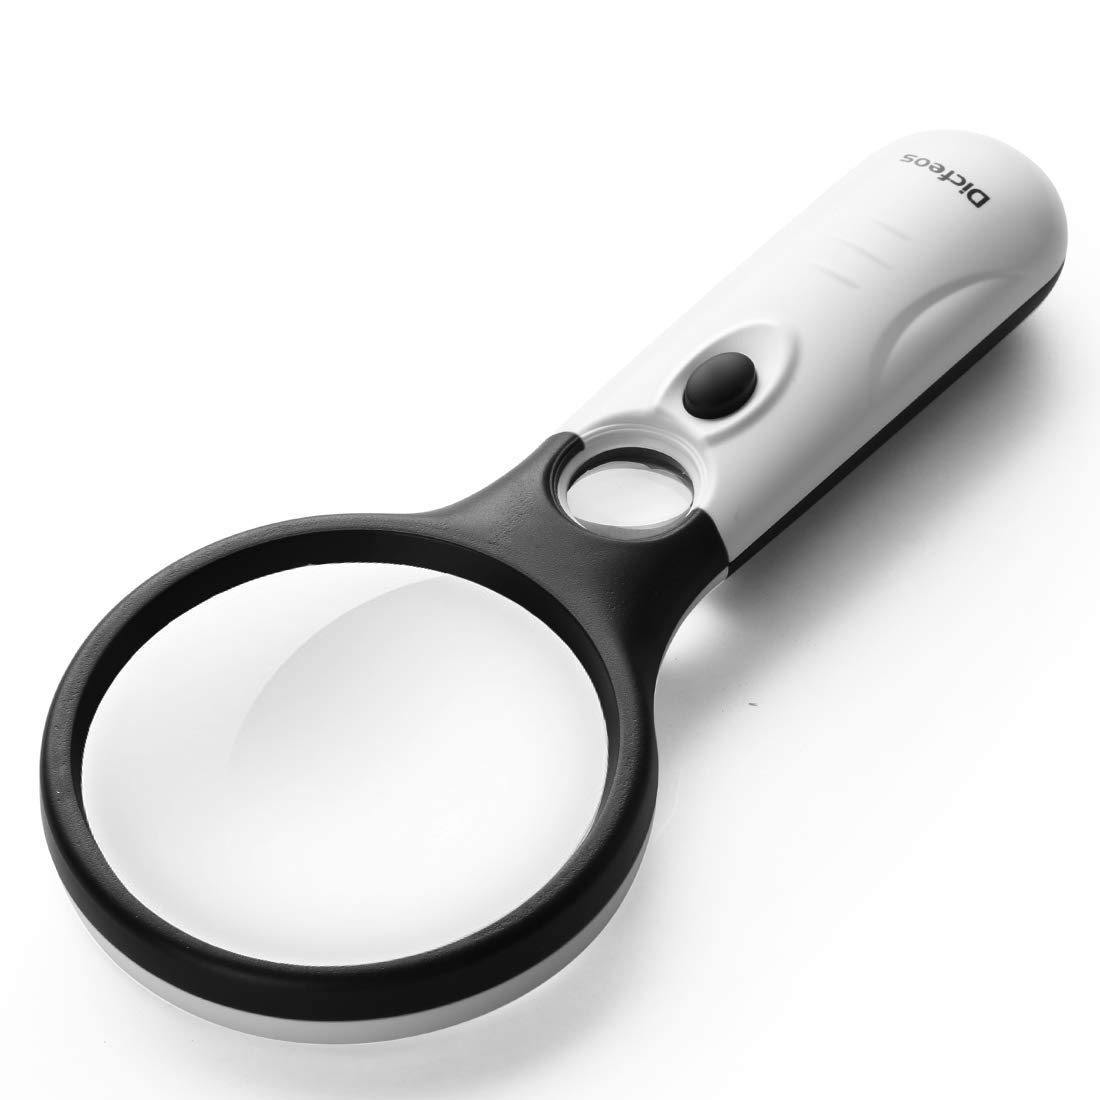 Dicfeos lighted magnifier glass